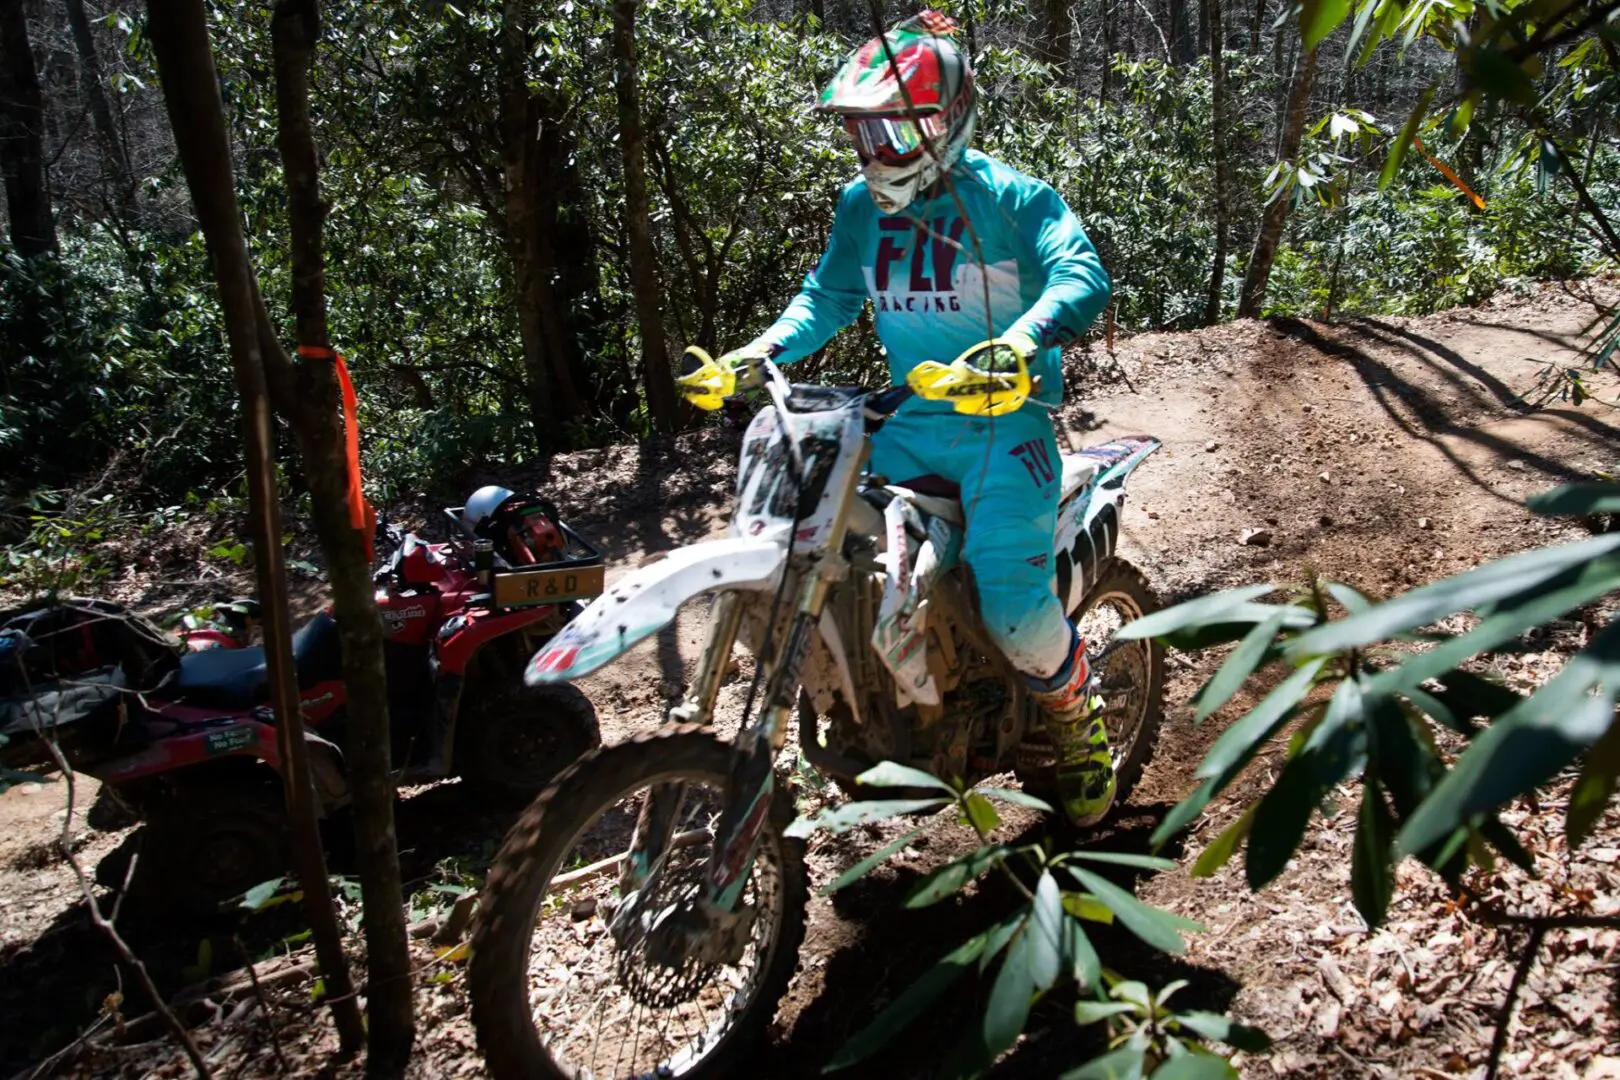 A person on a dirt bike riding in the woods.